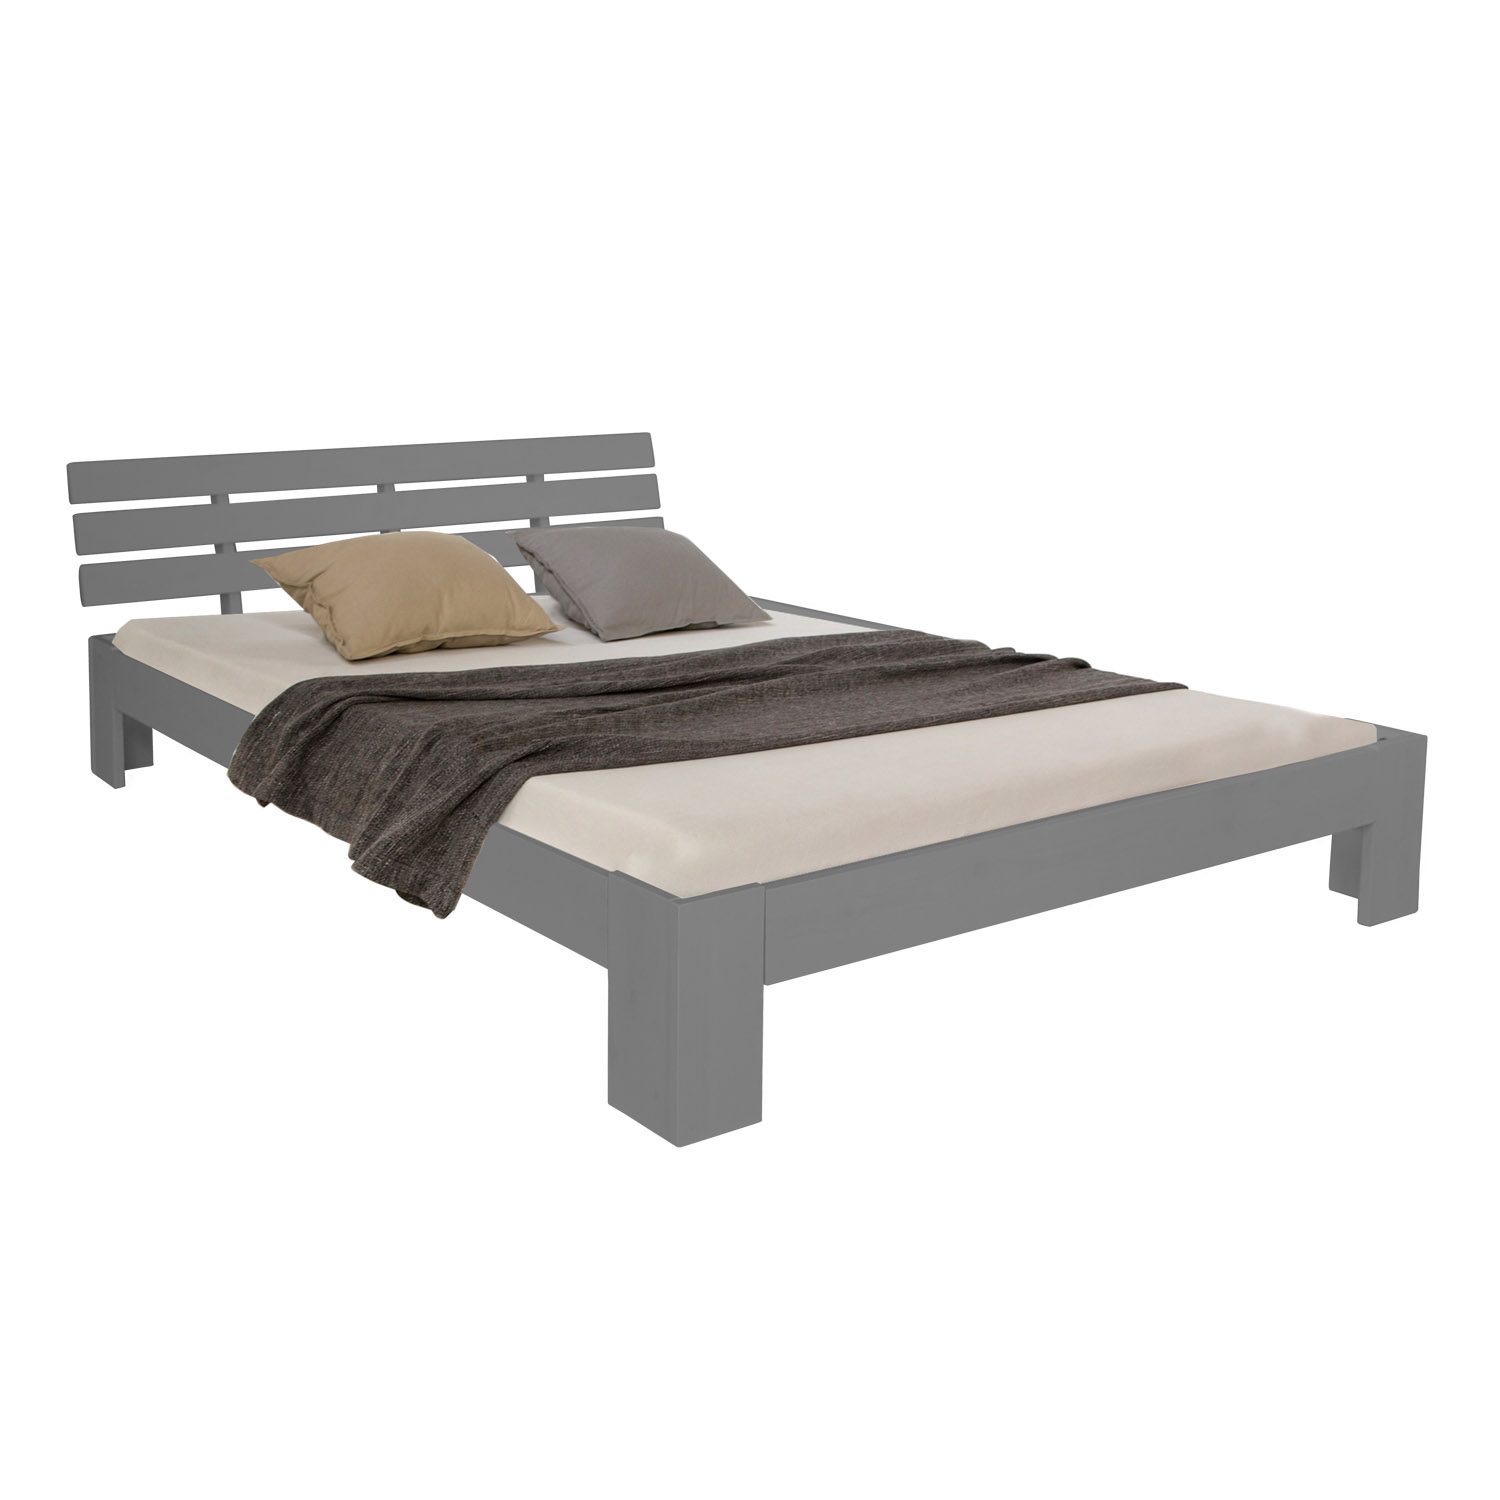 Double Bed Wooden Bed Futon Bed 160x200 Grey Pine Bed Bedstead Solid Wood